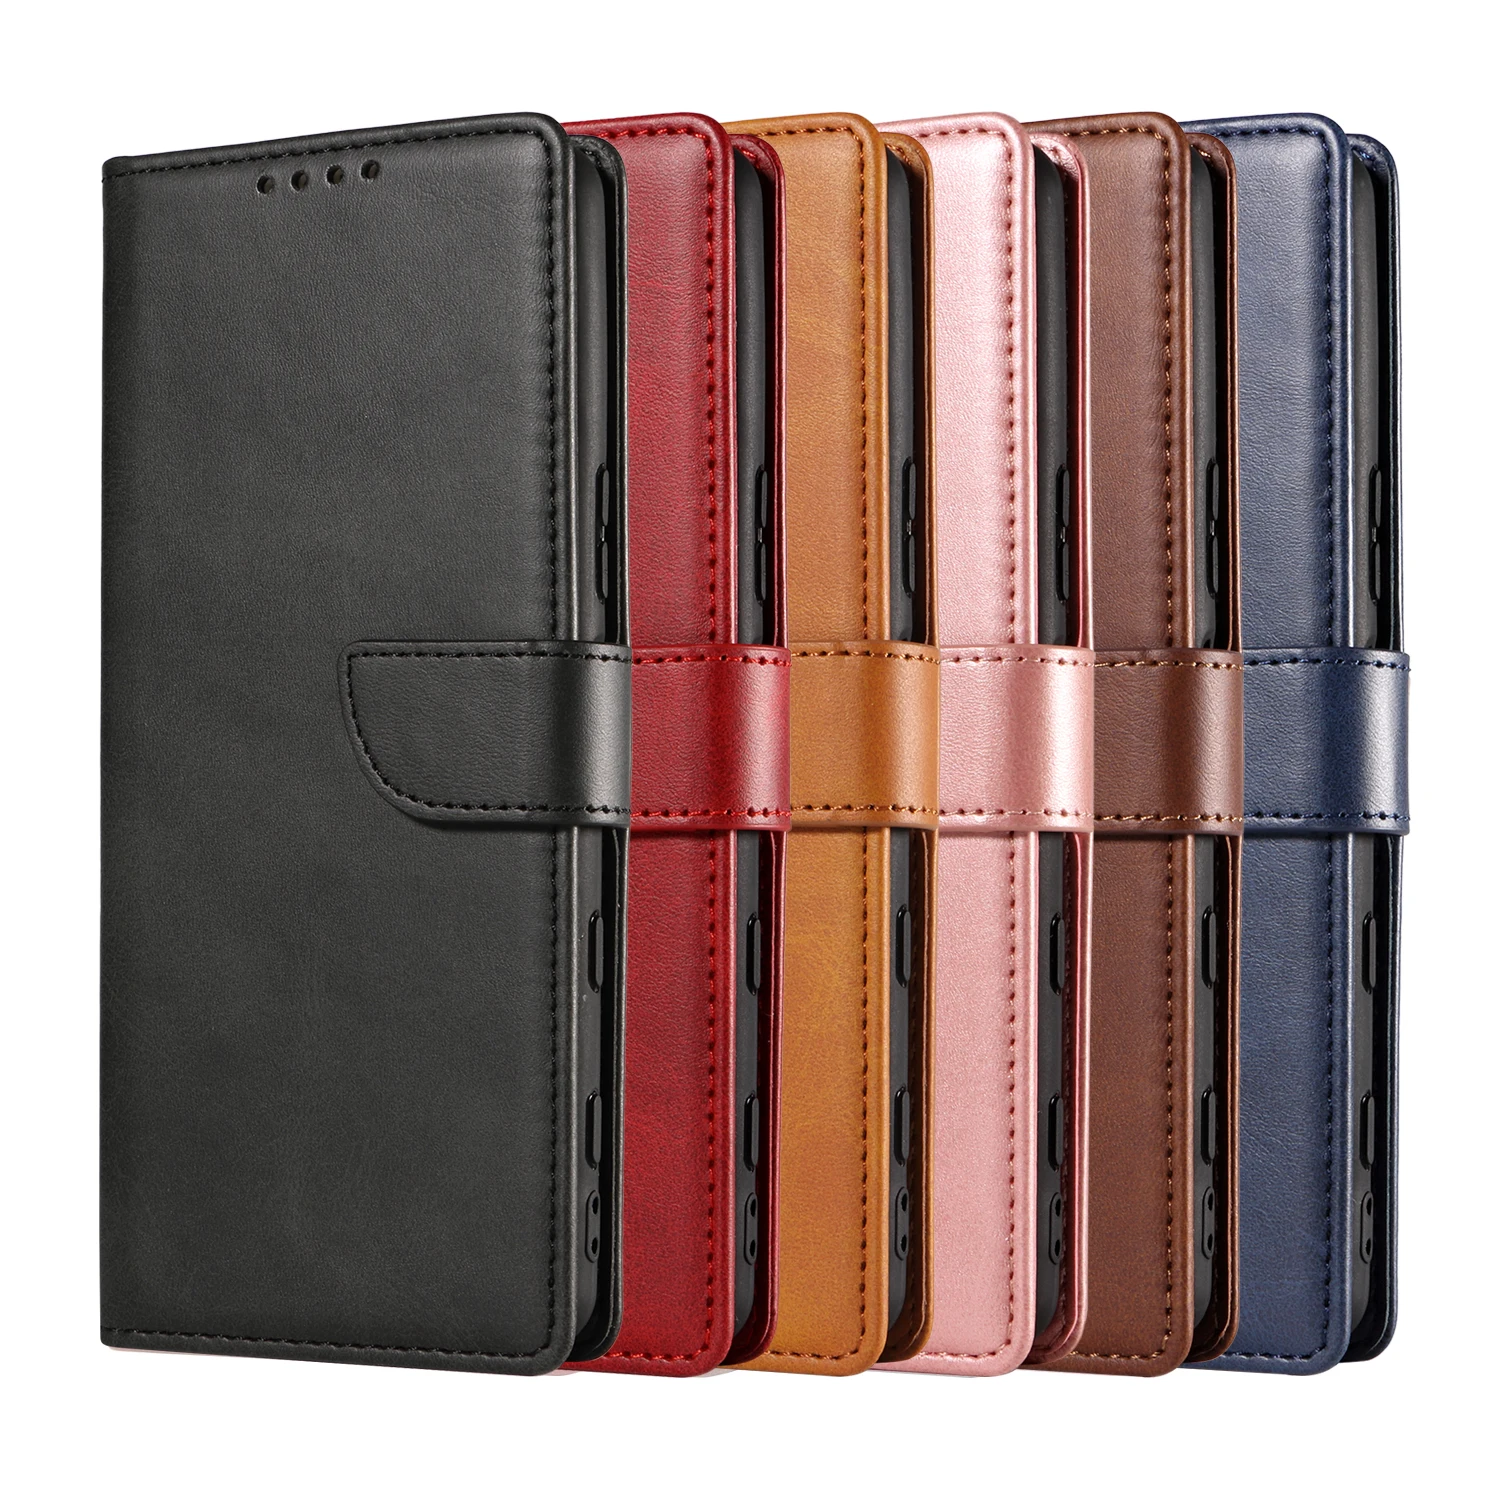 

Leather Flip Cover Case for Aquos Sense4 Zero6 Luxury Wallet Cards Stand Phone Bags Cove